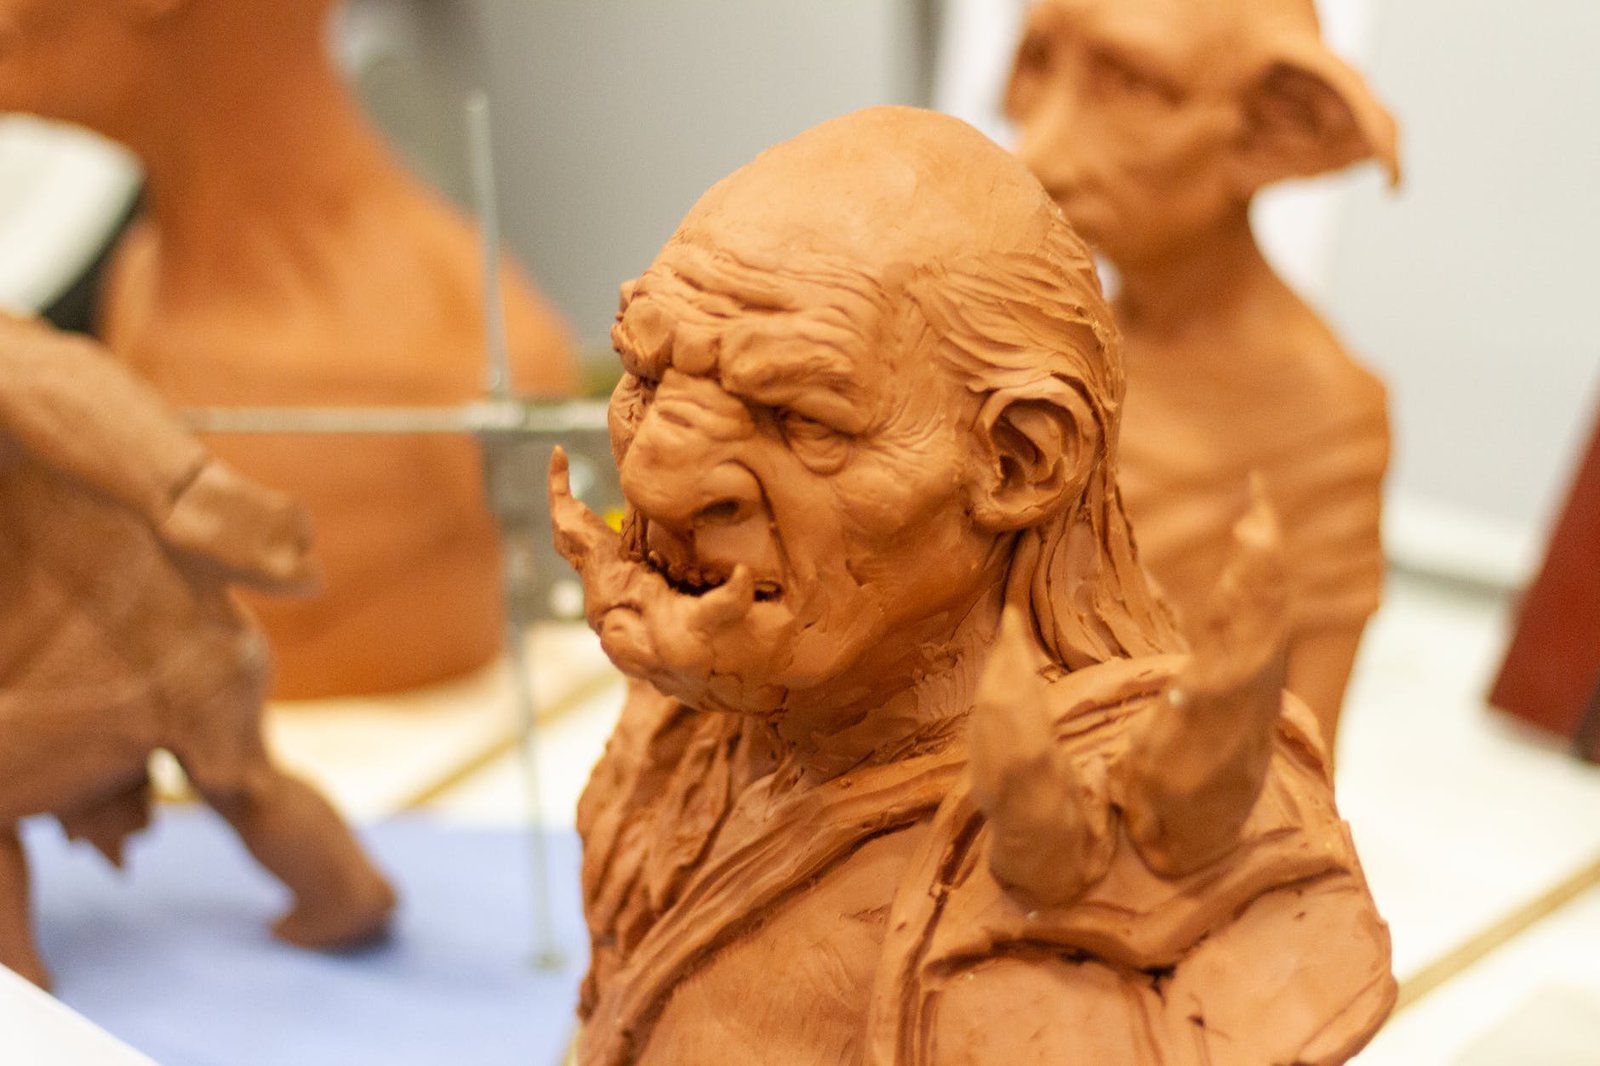 earthen figurine of angry fictional creatures